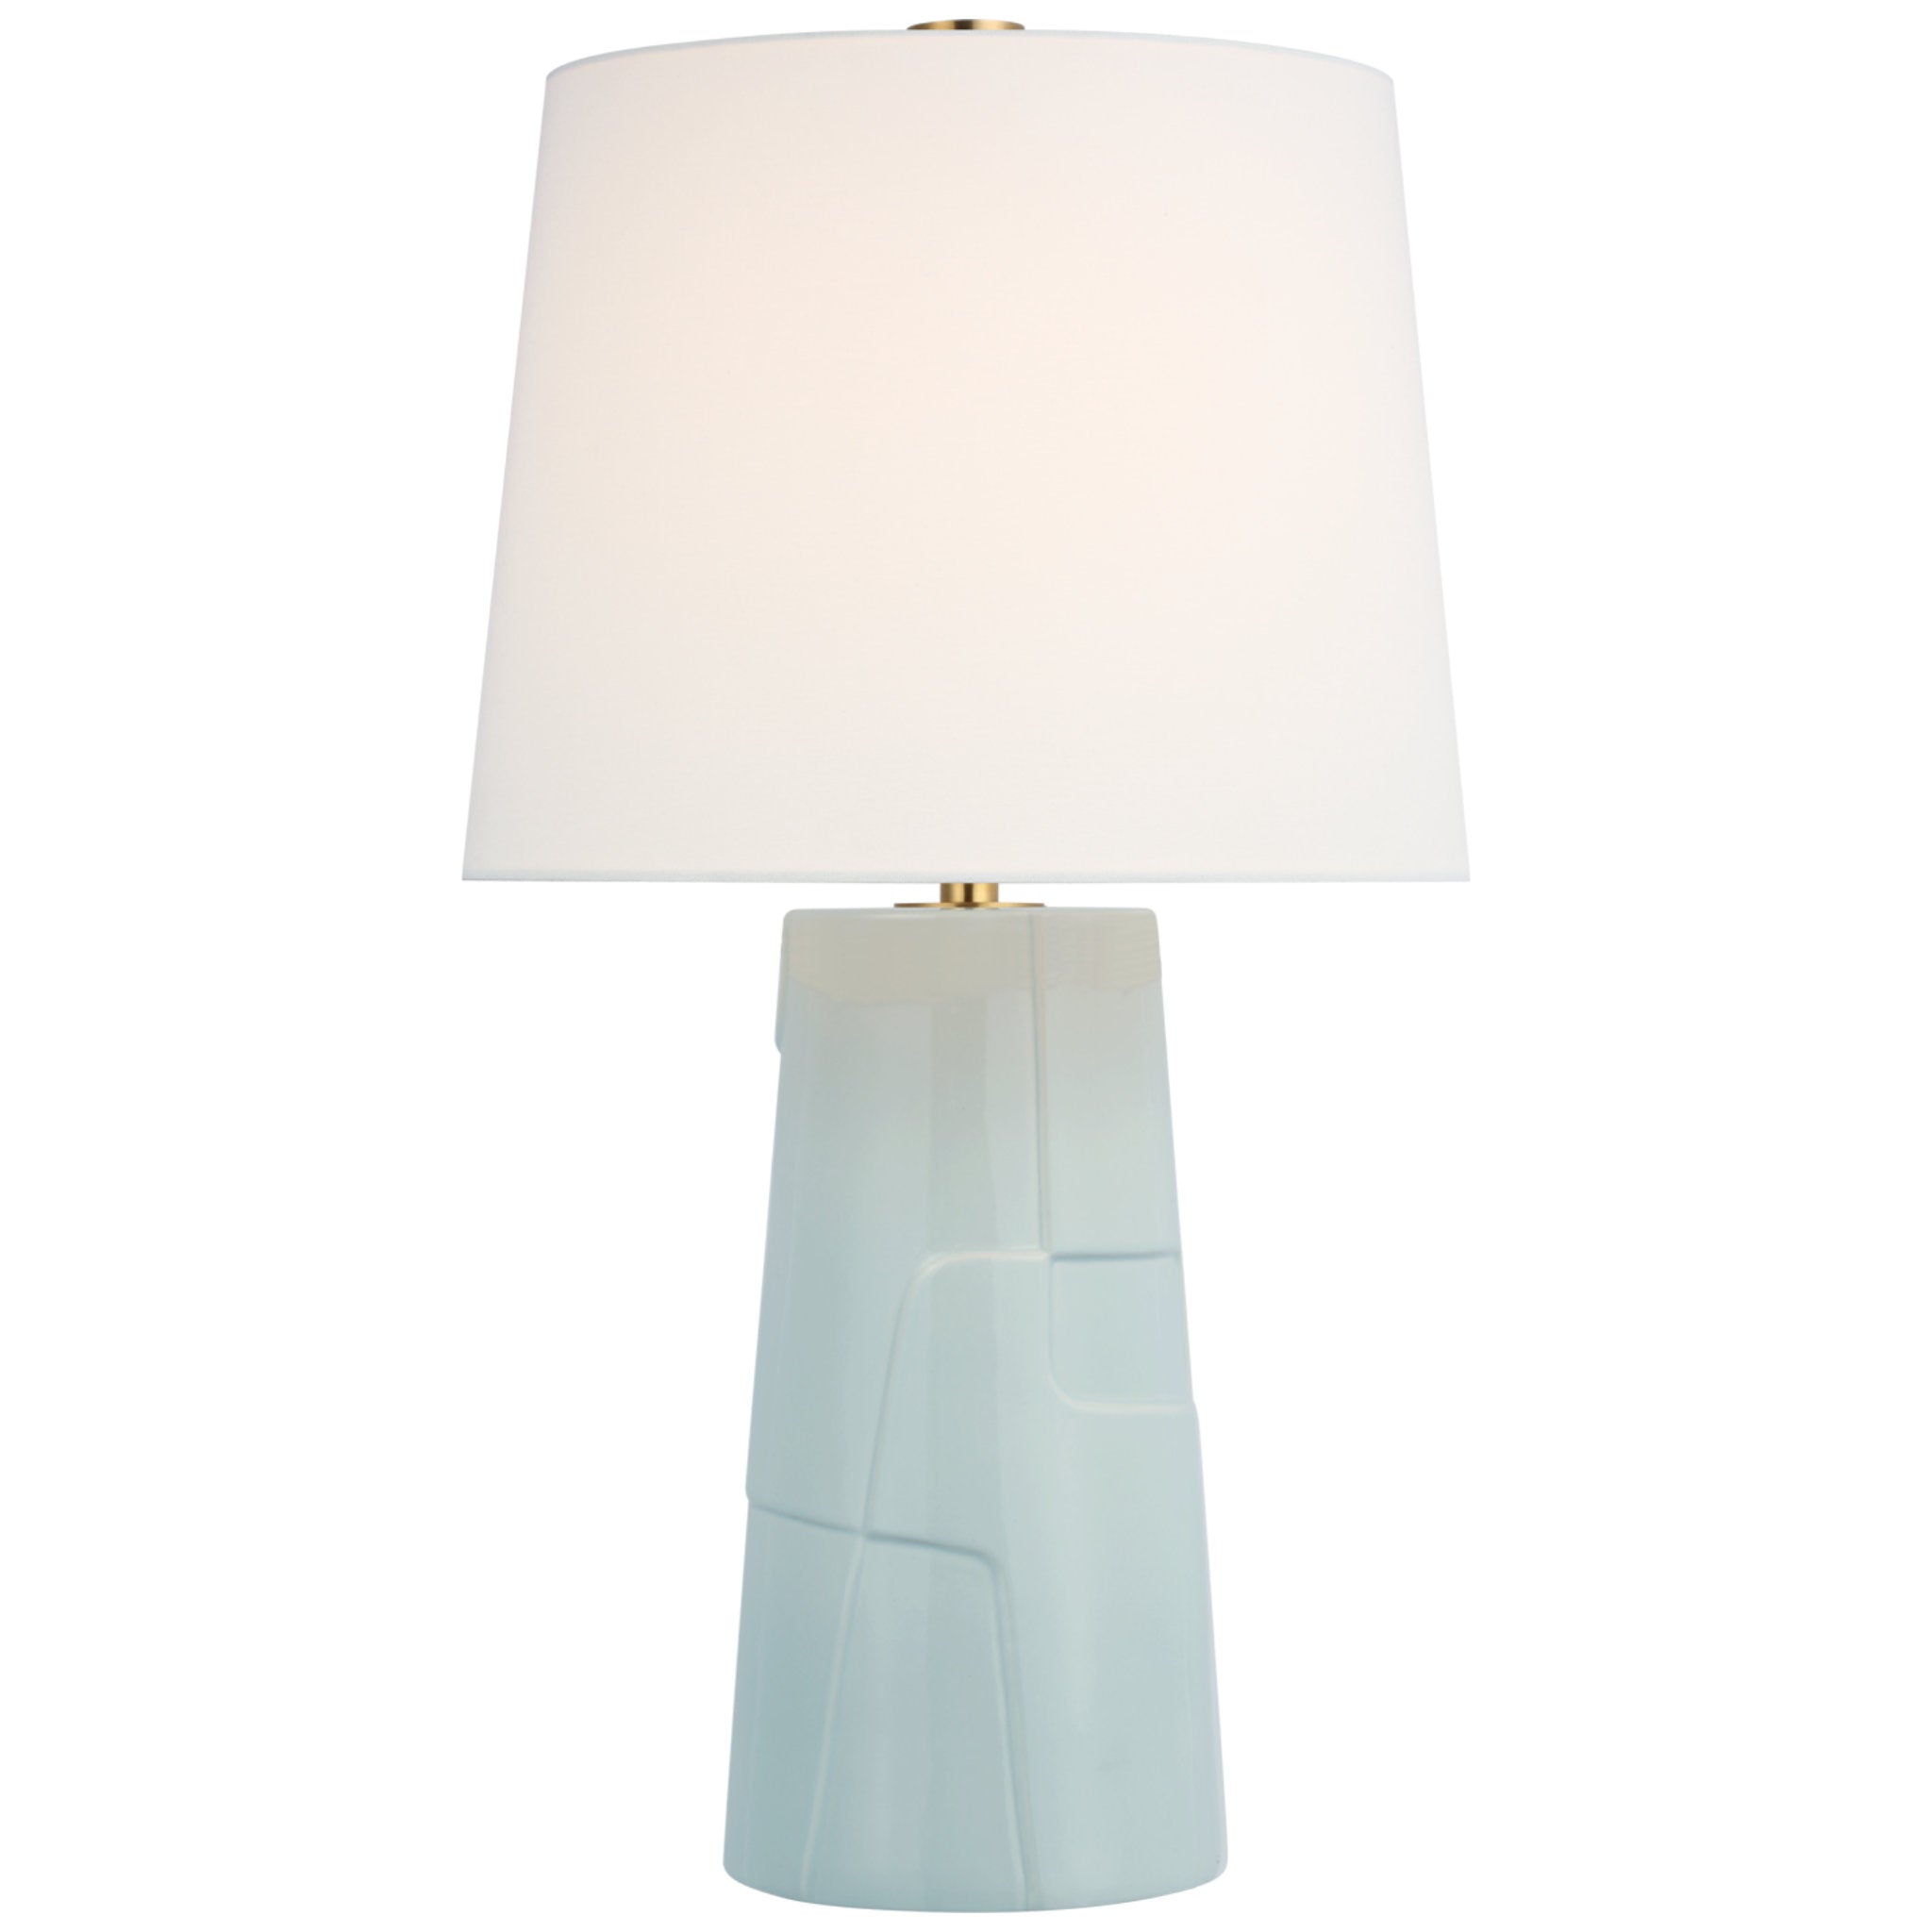 Barbara Barry Braque Medium Debossed Table Lamp in Ice Blue Porcelain with Linen Shade